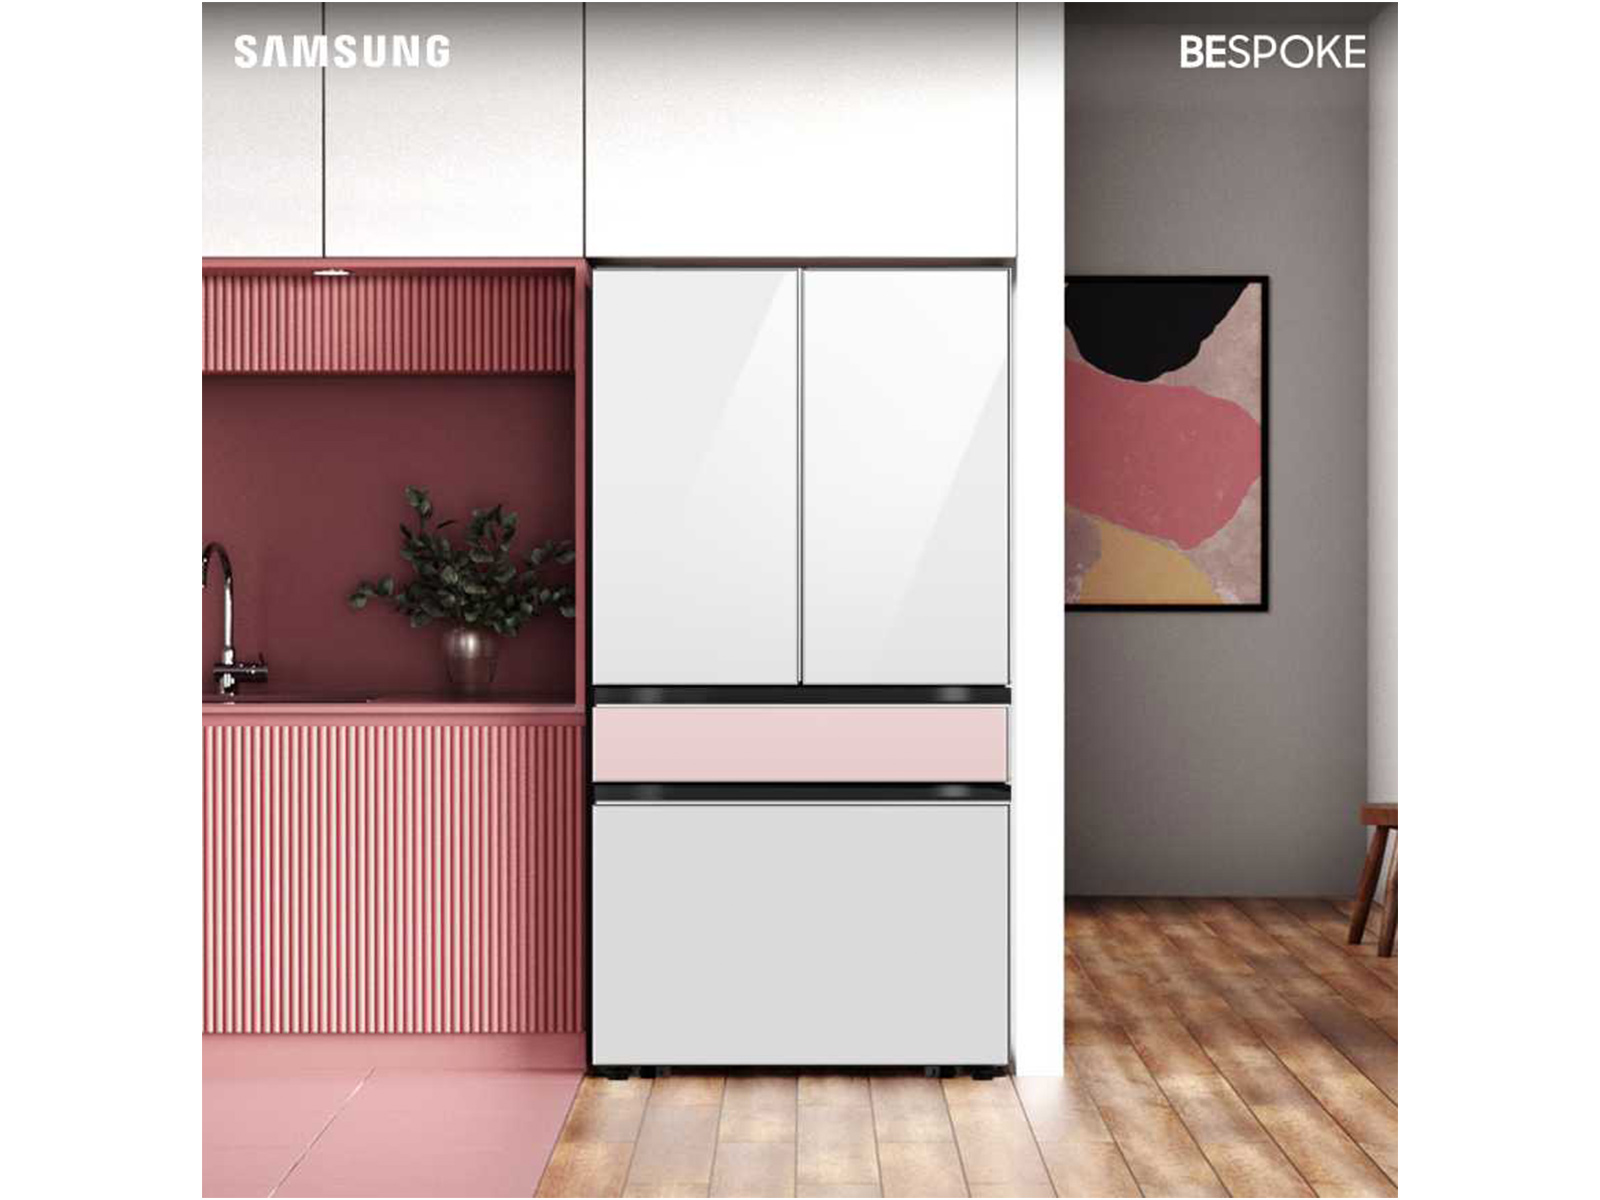 Samsung Bespoke 4-Door French Door Refrigerator (23 cu. ft.) with AutoFill Water Pitcher and Customizable Door Panel Colors in White Glass with Pink Glass Middle Panel